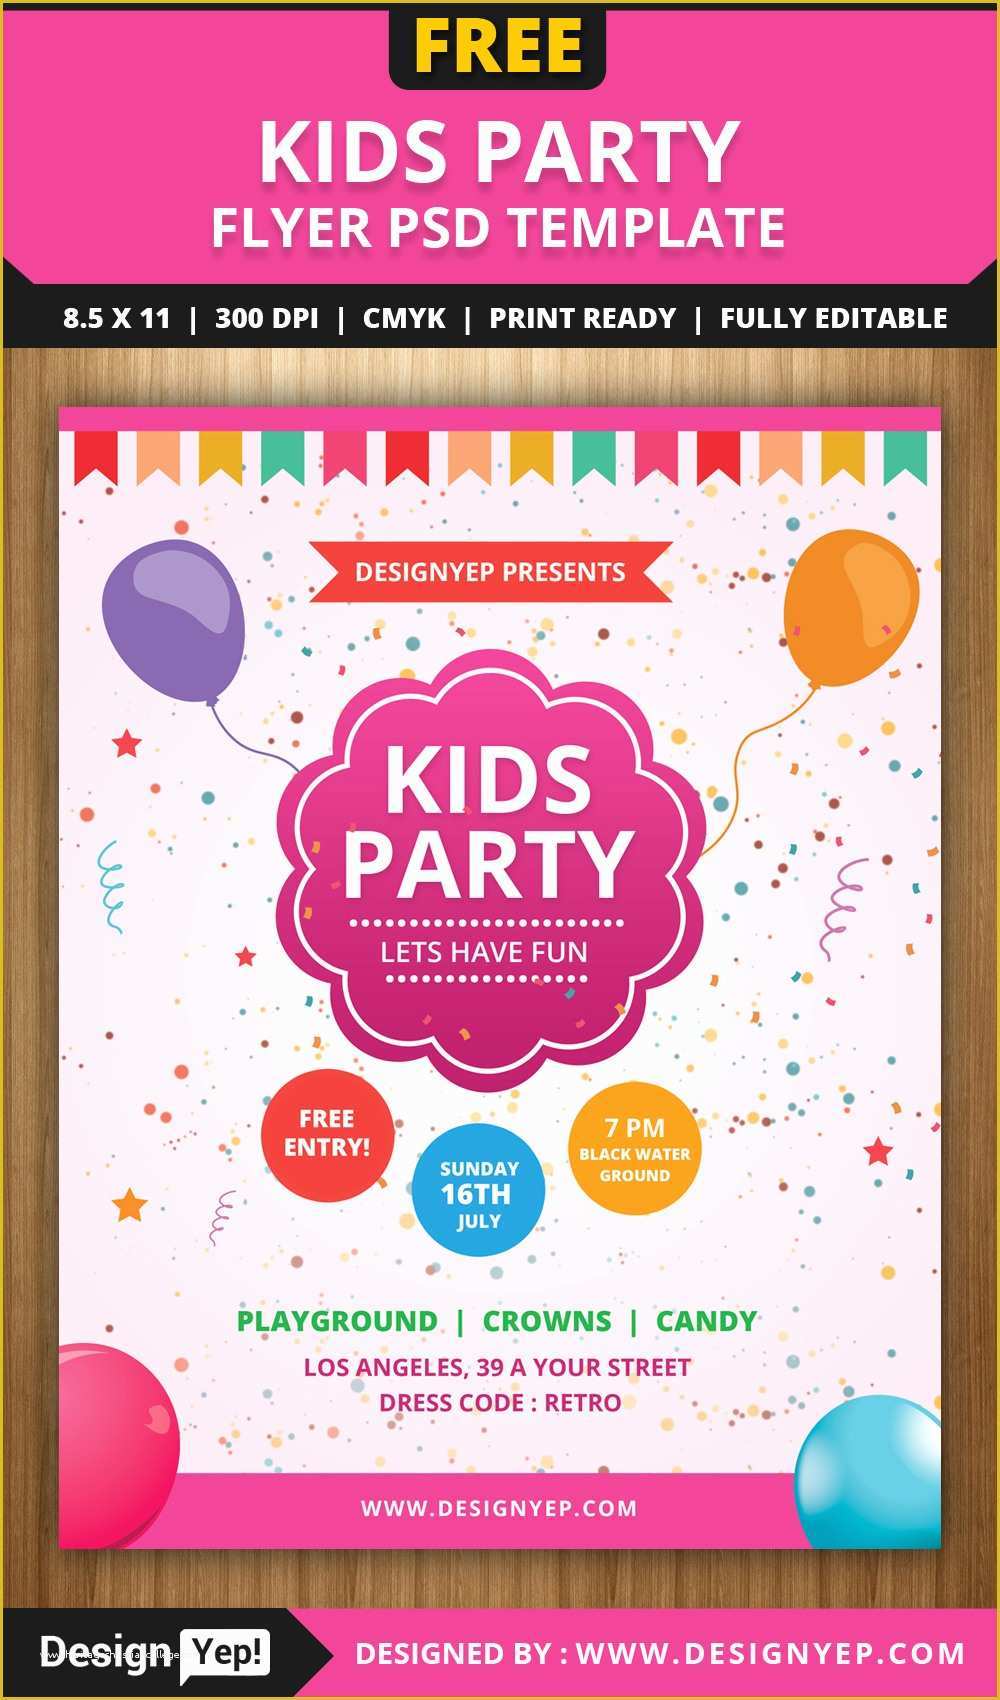 Party Poster Template Free Download Of Free Kids Party Flyer Psd Template Designyep